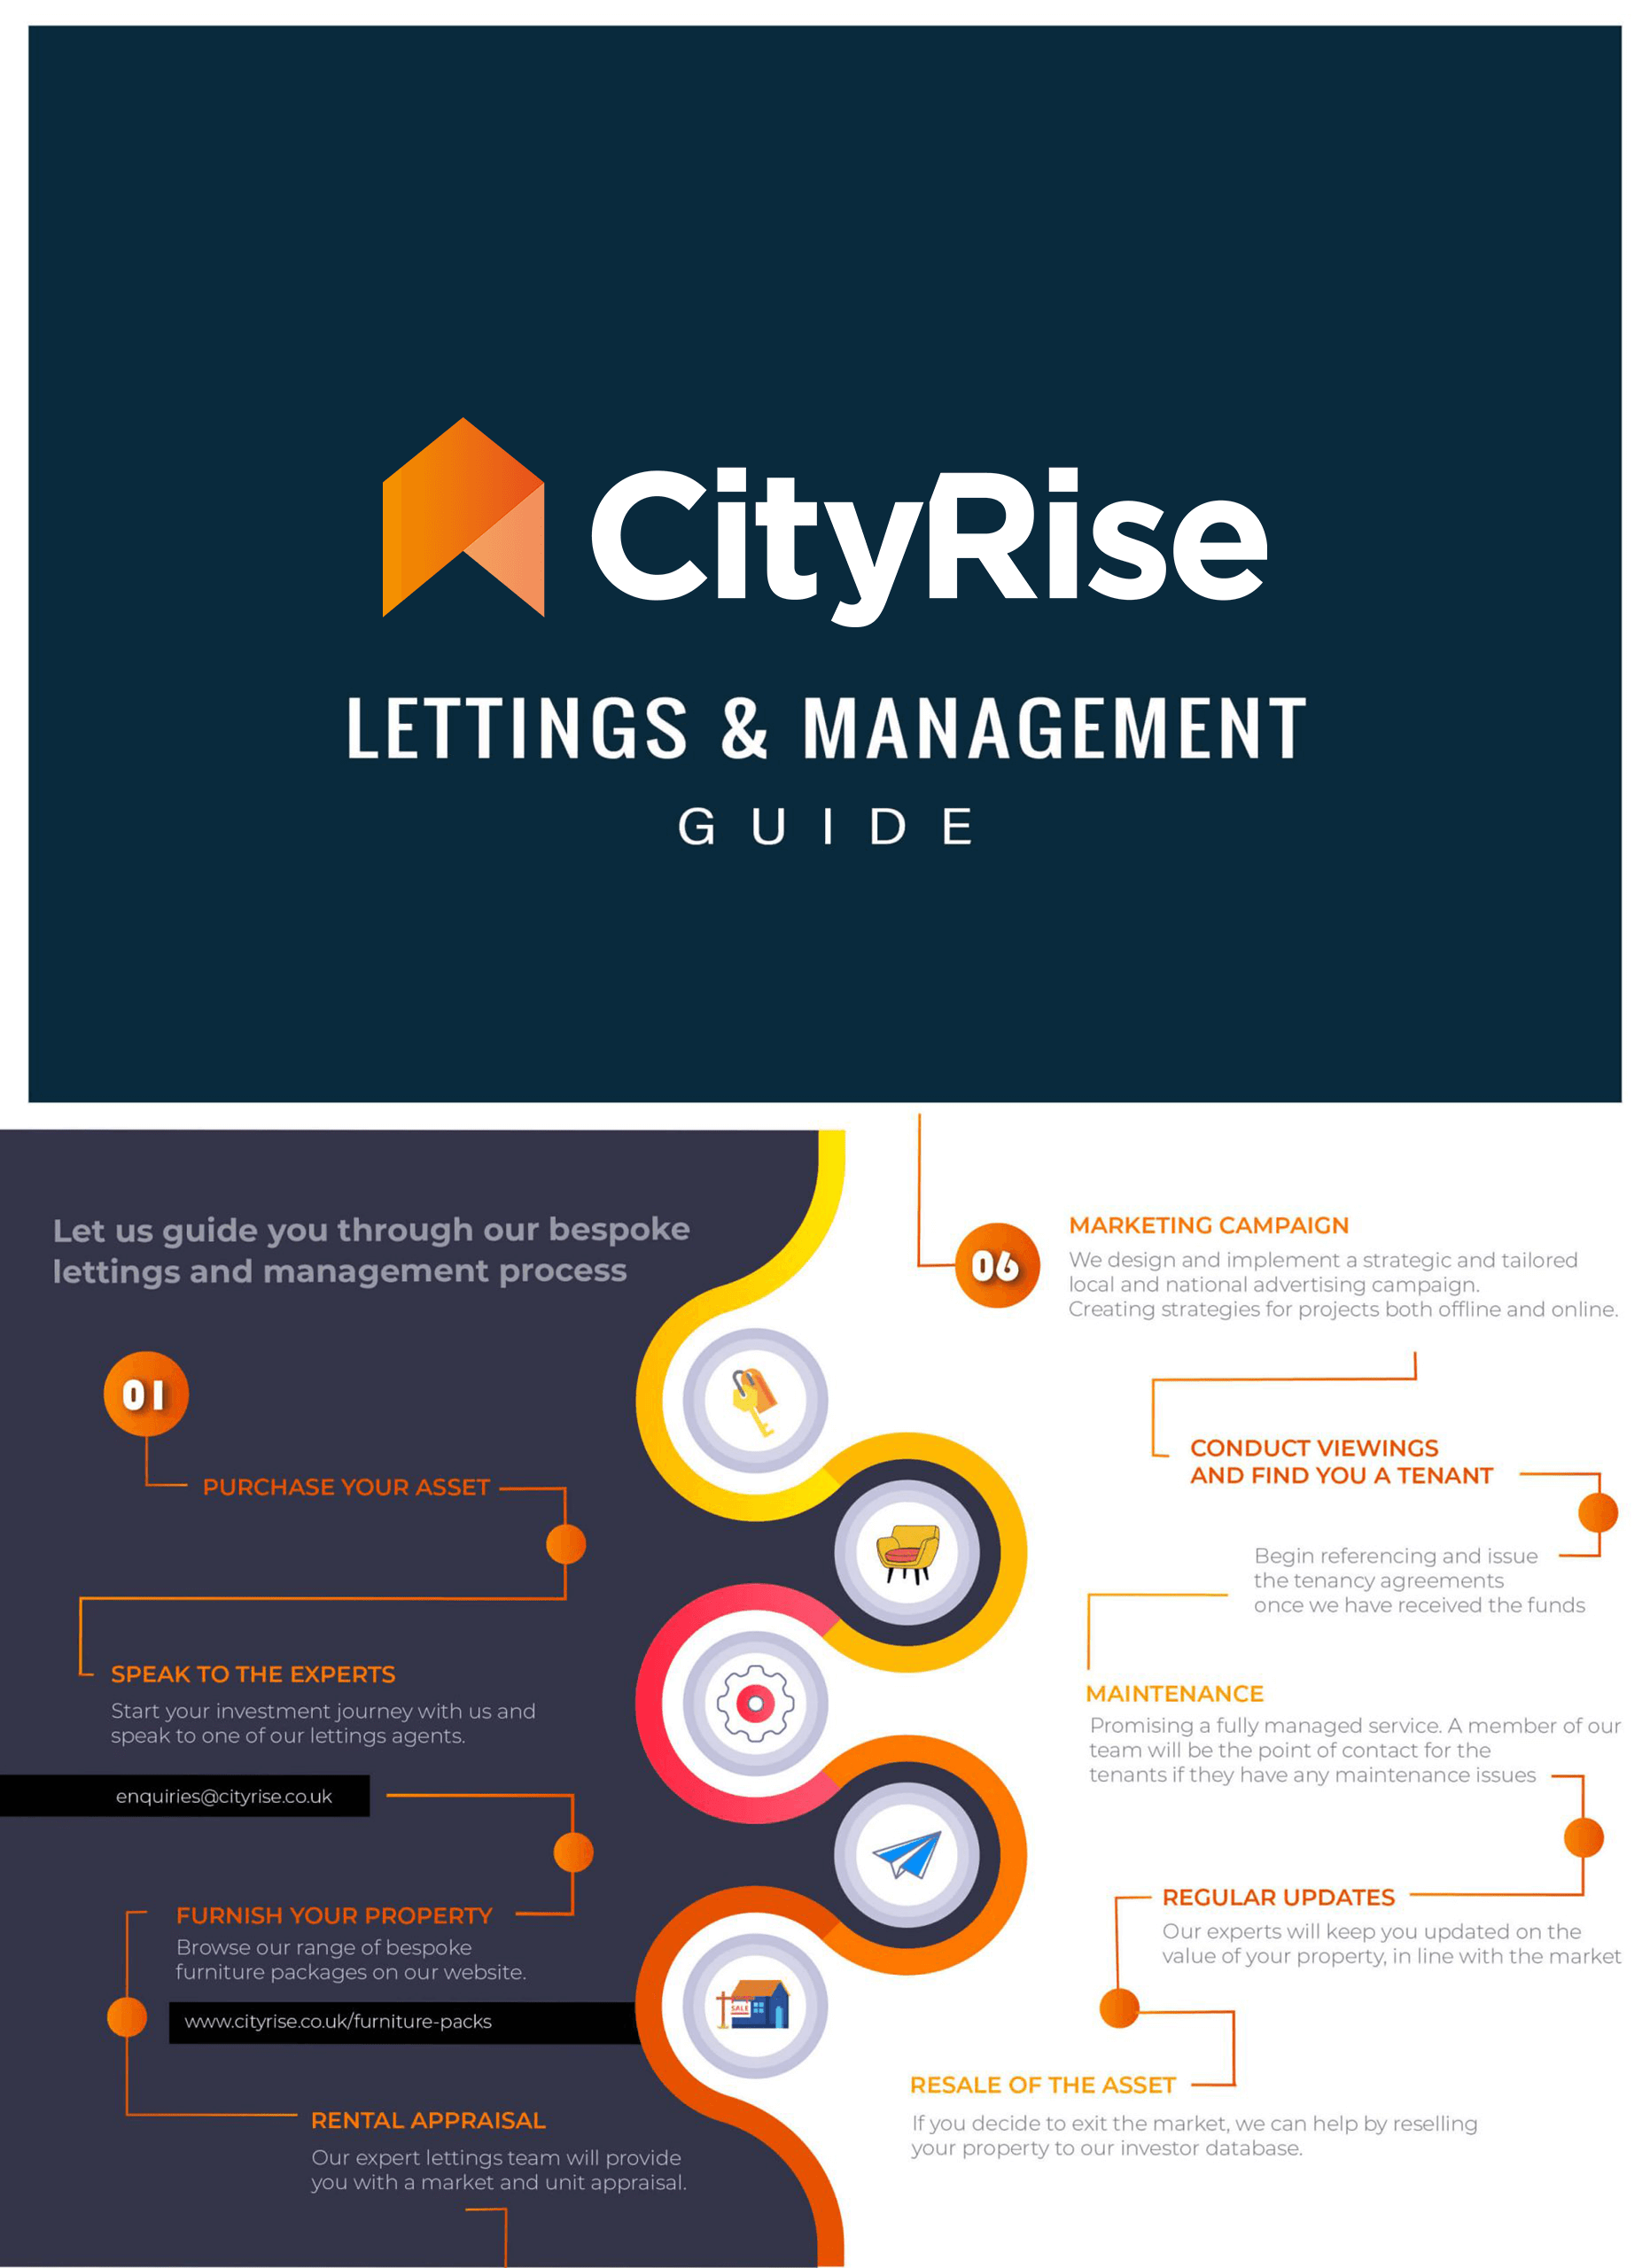 Lettings & Management Guide